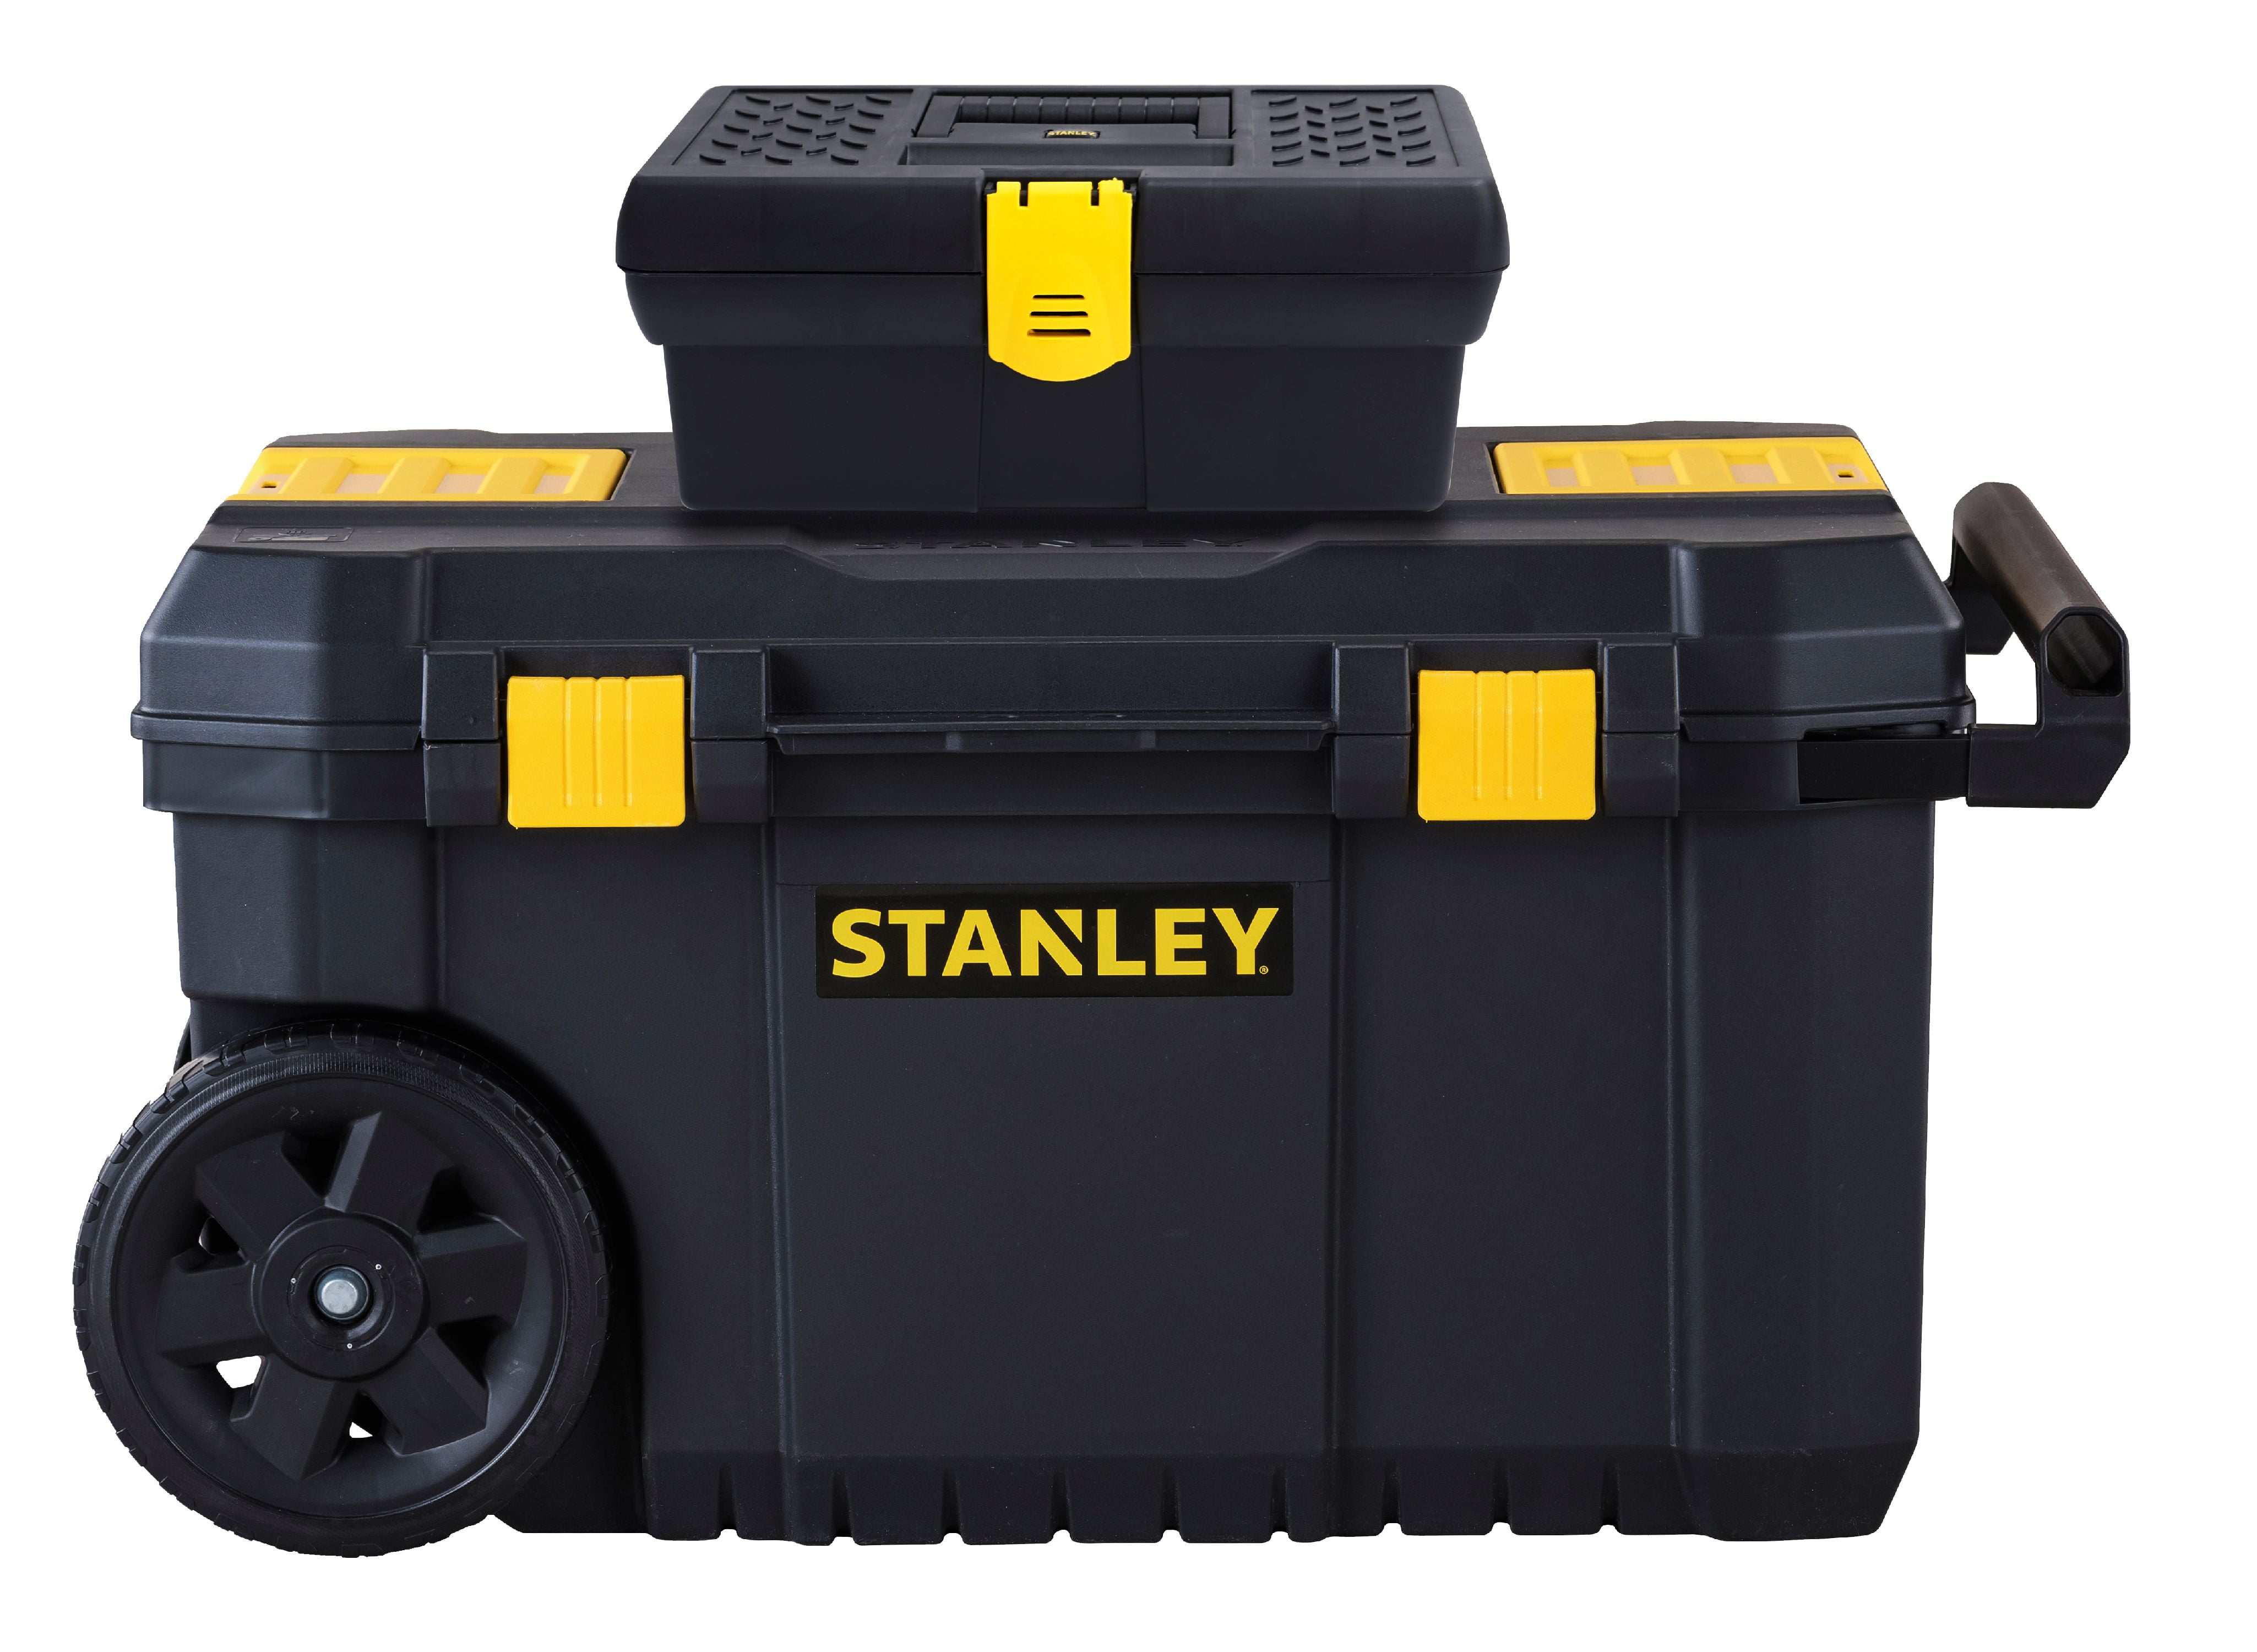 STANLEY 13 Gallon Rolling Chest and Interlocking13 Inch Tool Box Model 